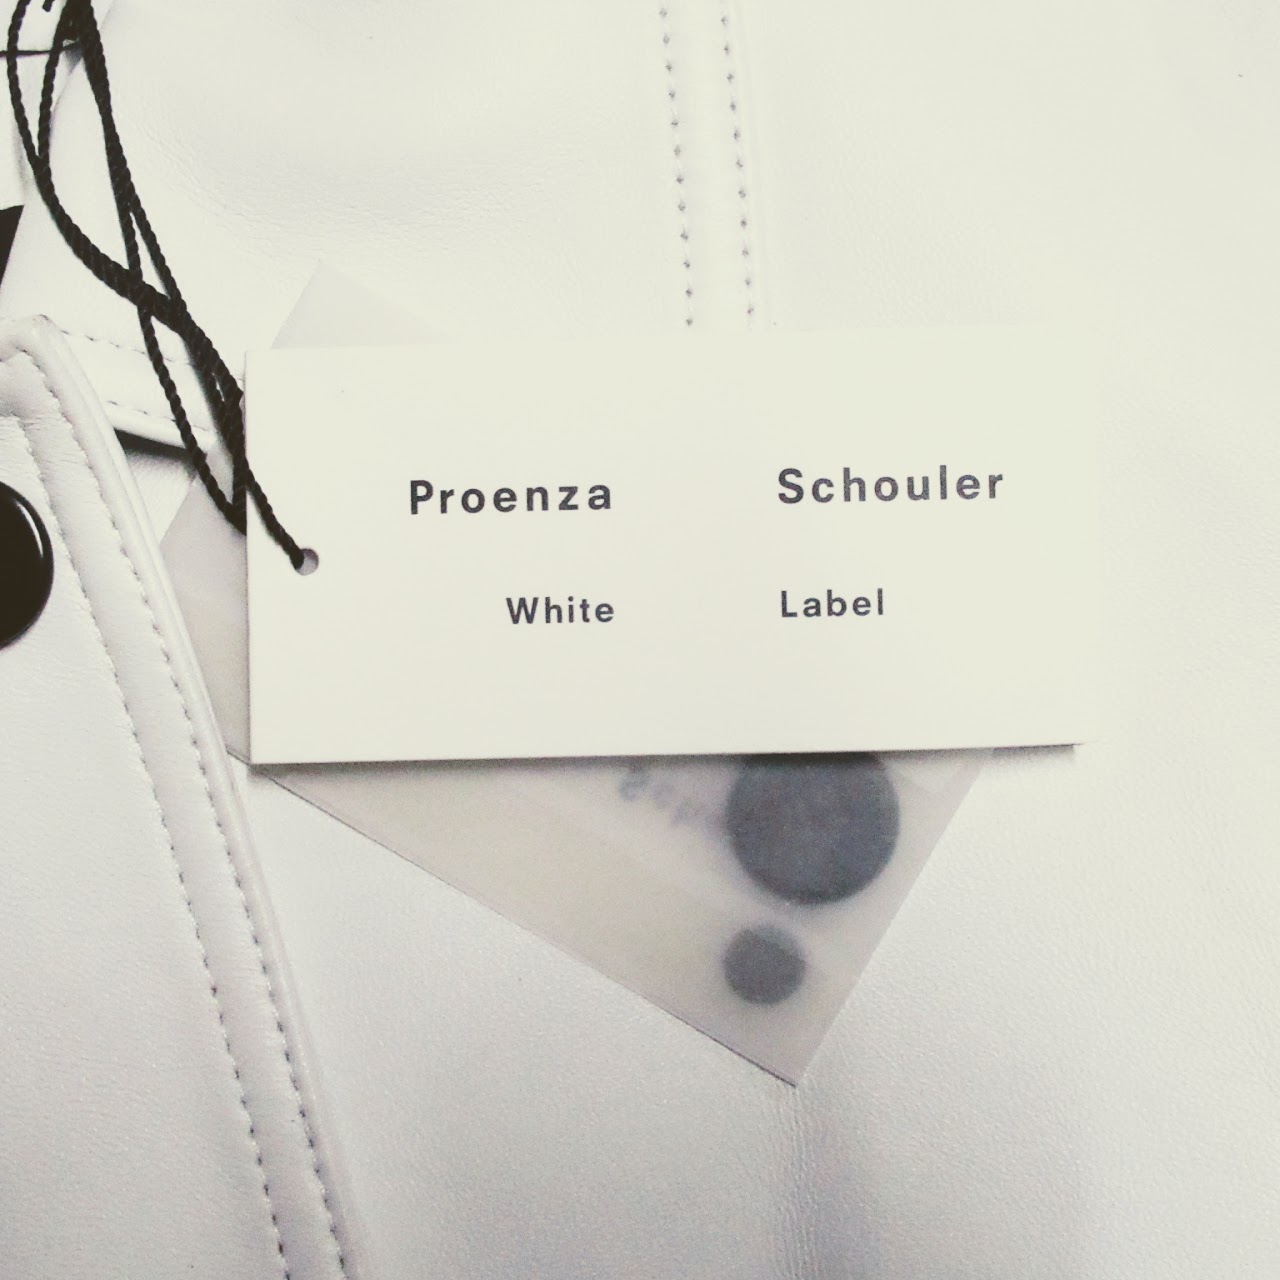 Proenza Schouler White Label Leather Bomber Jacket